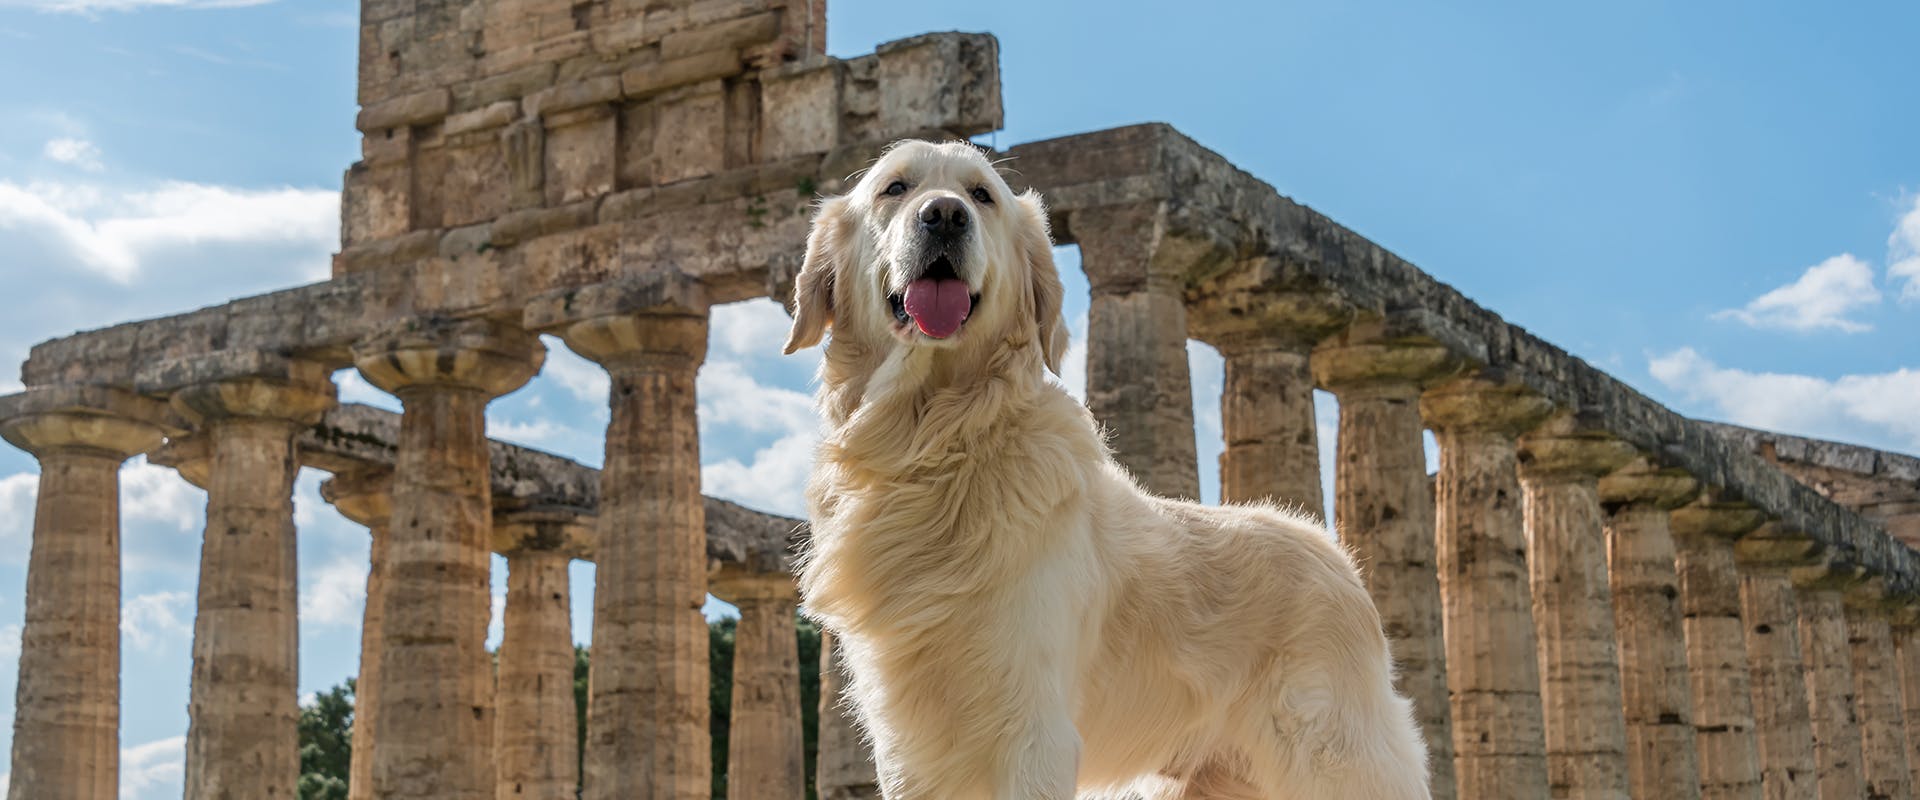 A Golden Retriever standing by some ancient ruins